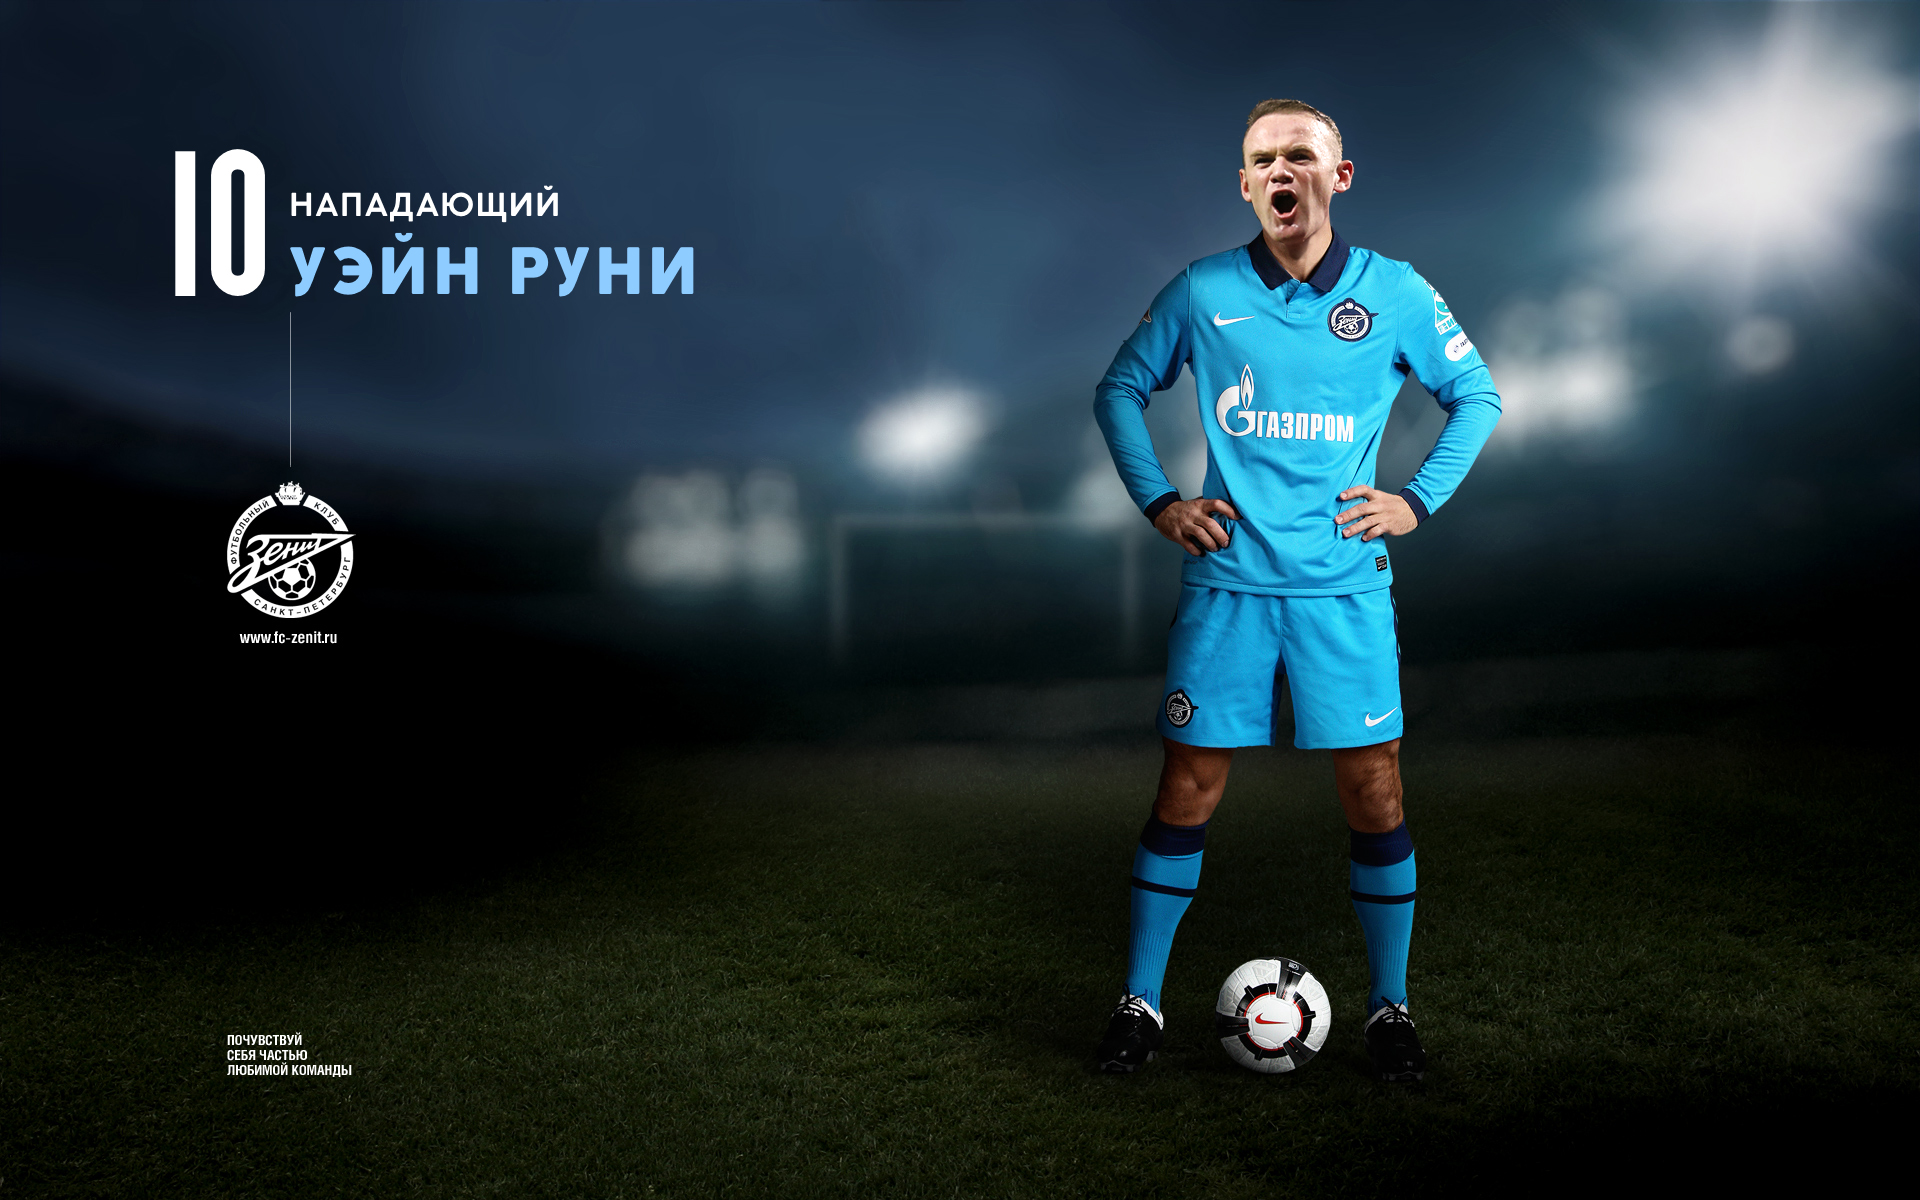 Wayne Rooney to sign for Zenit St. Petersburg in 50 million-euro transfer